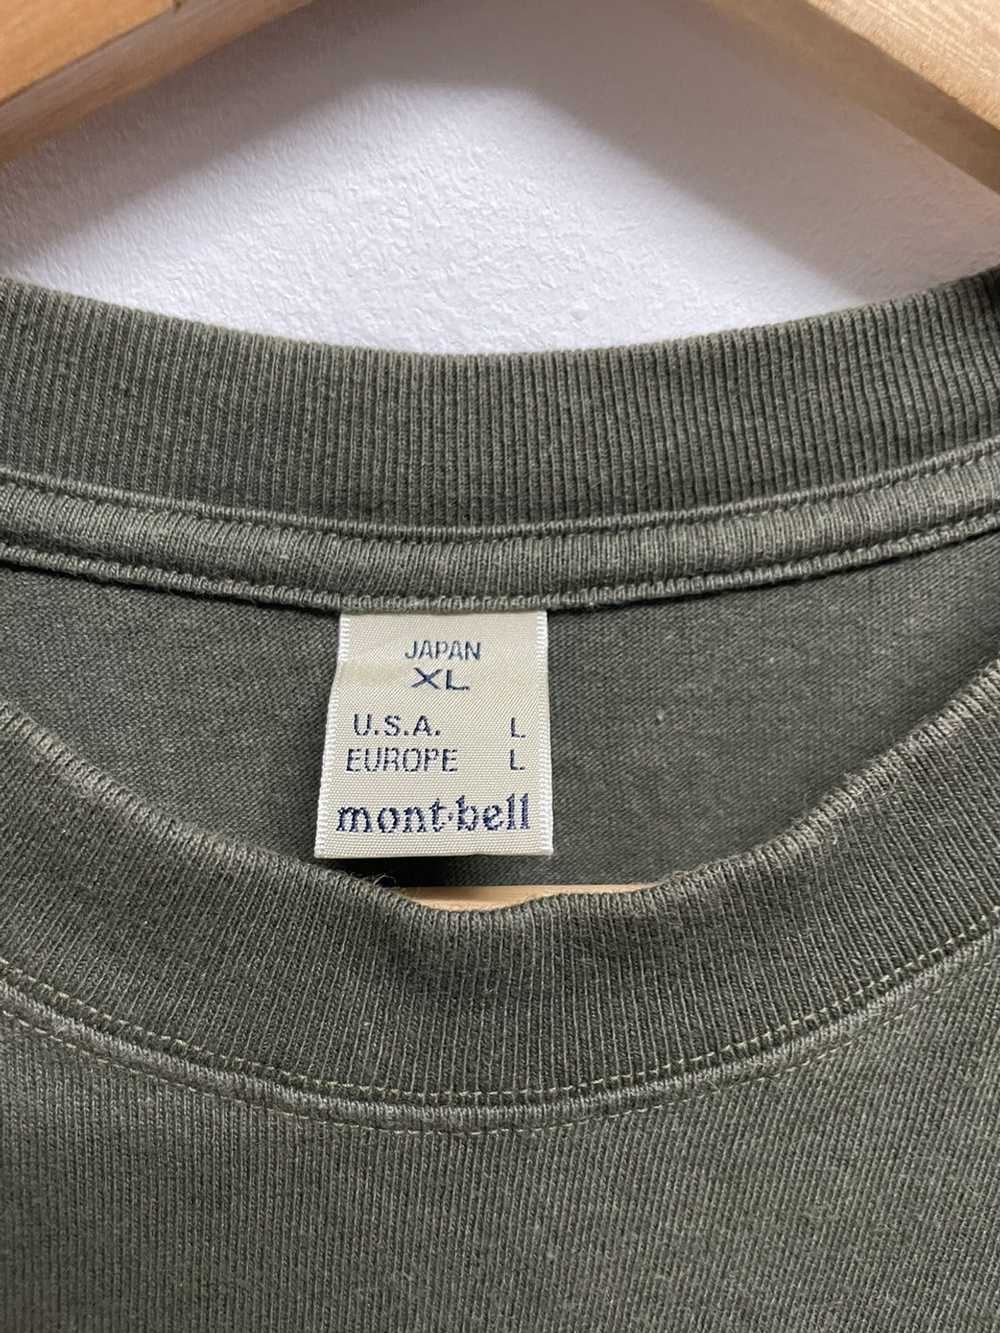 Montbell × Streetwear × Vintage MontBell T shirt - image 5